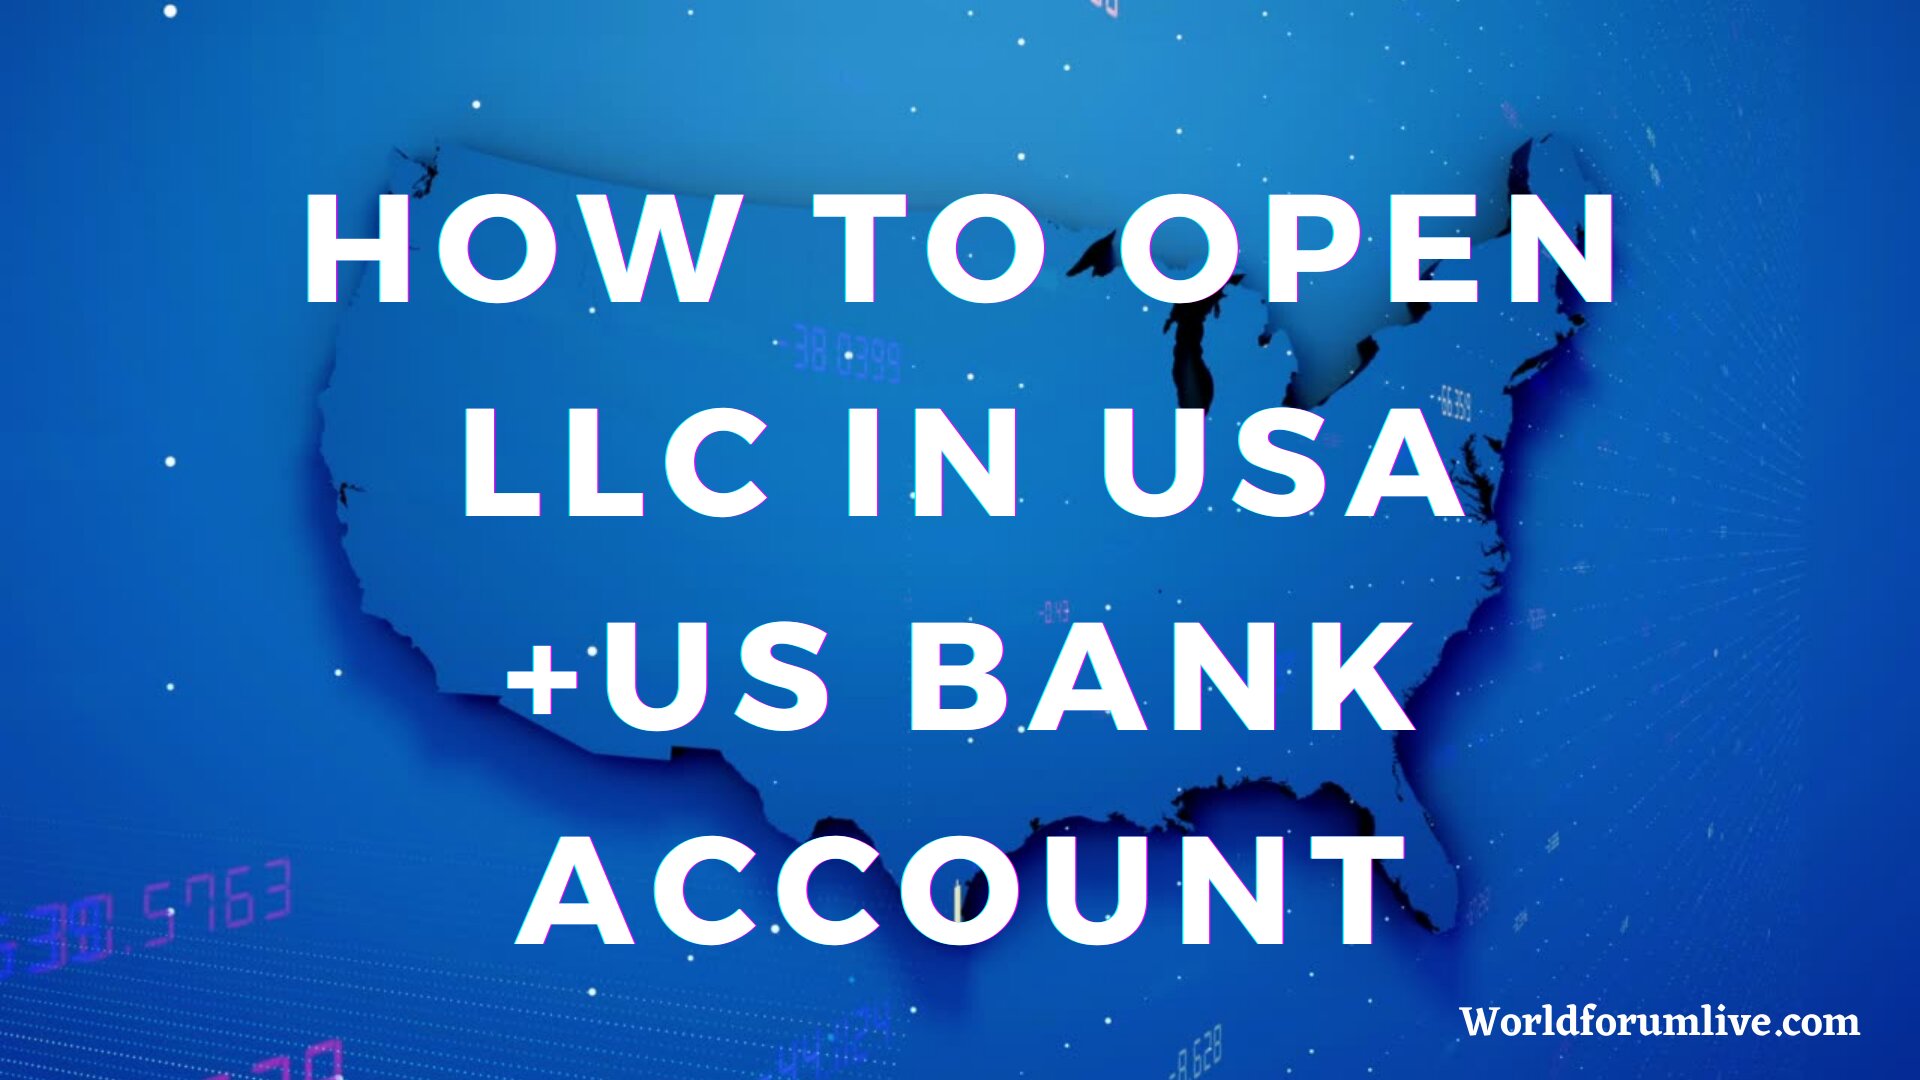 Step By Step How To Set Up An LLC In USA For Non-Residents And US Bank.jpg